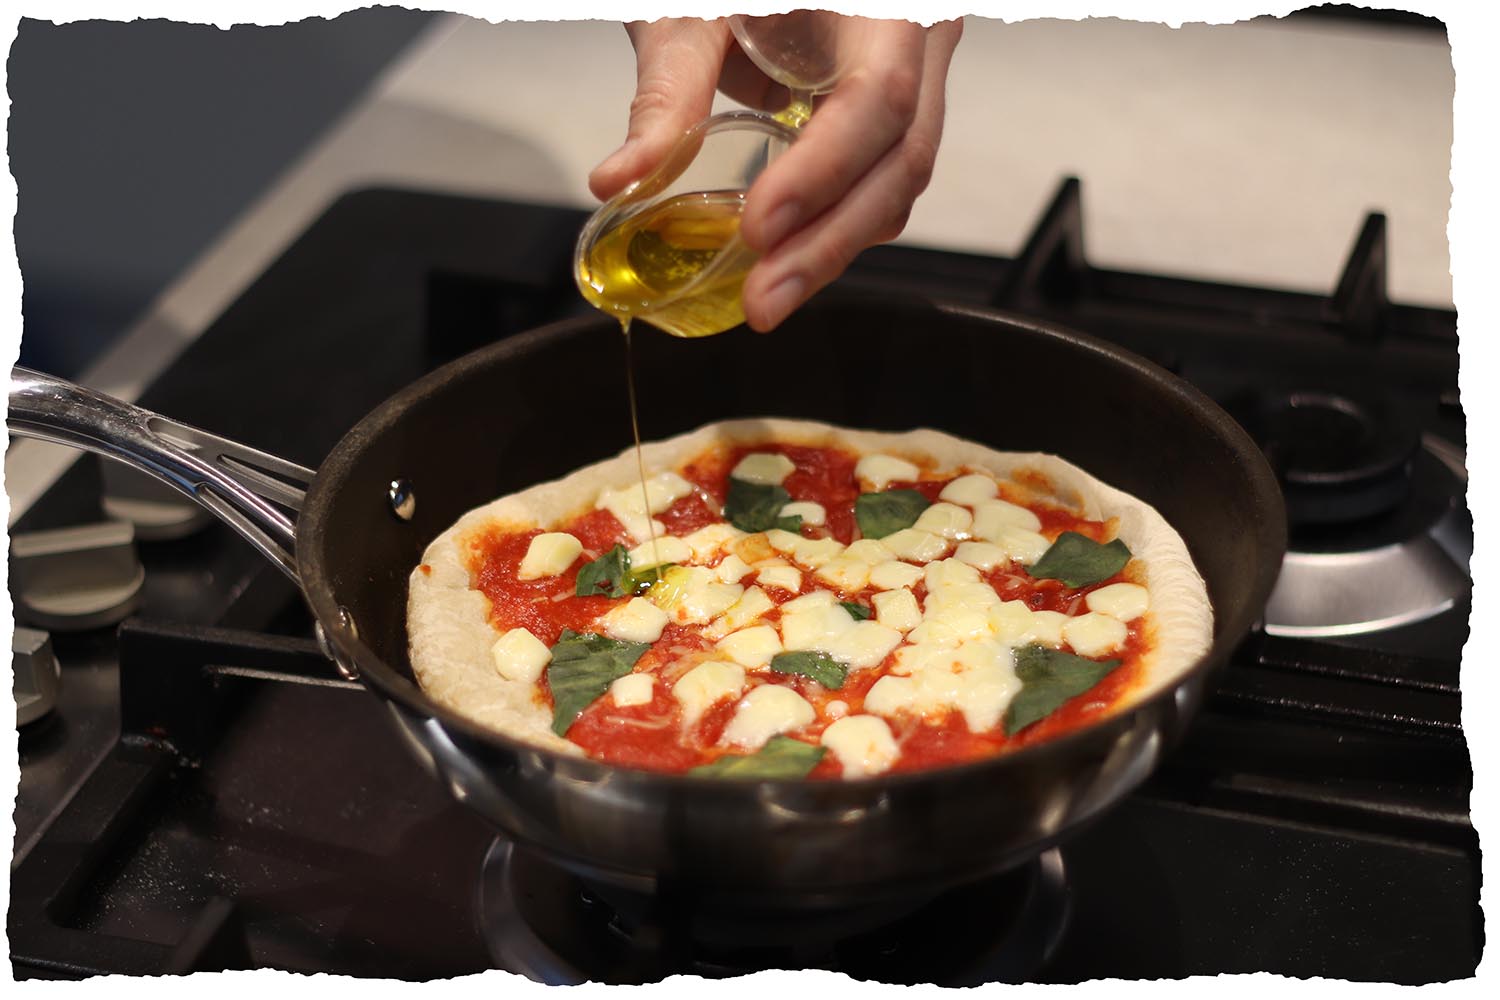 Drizzle olive oil on your pizza